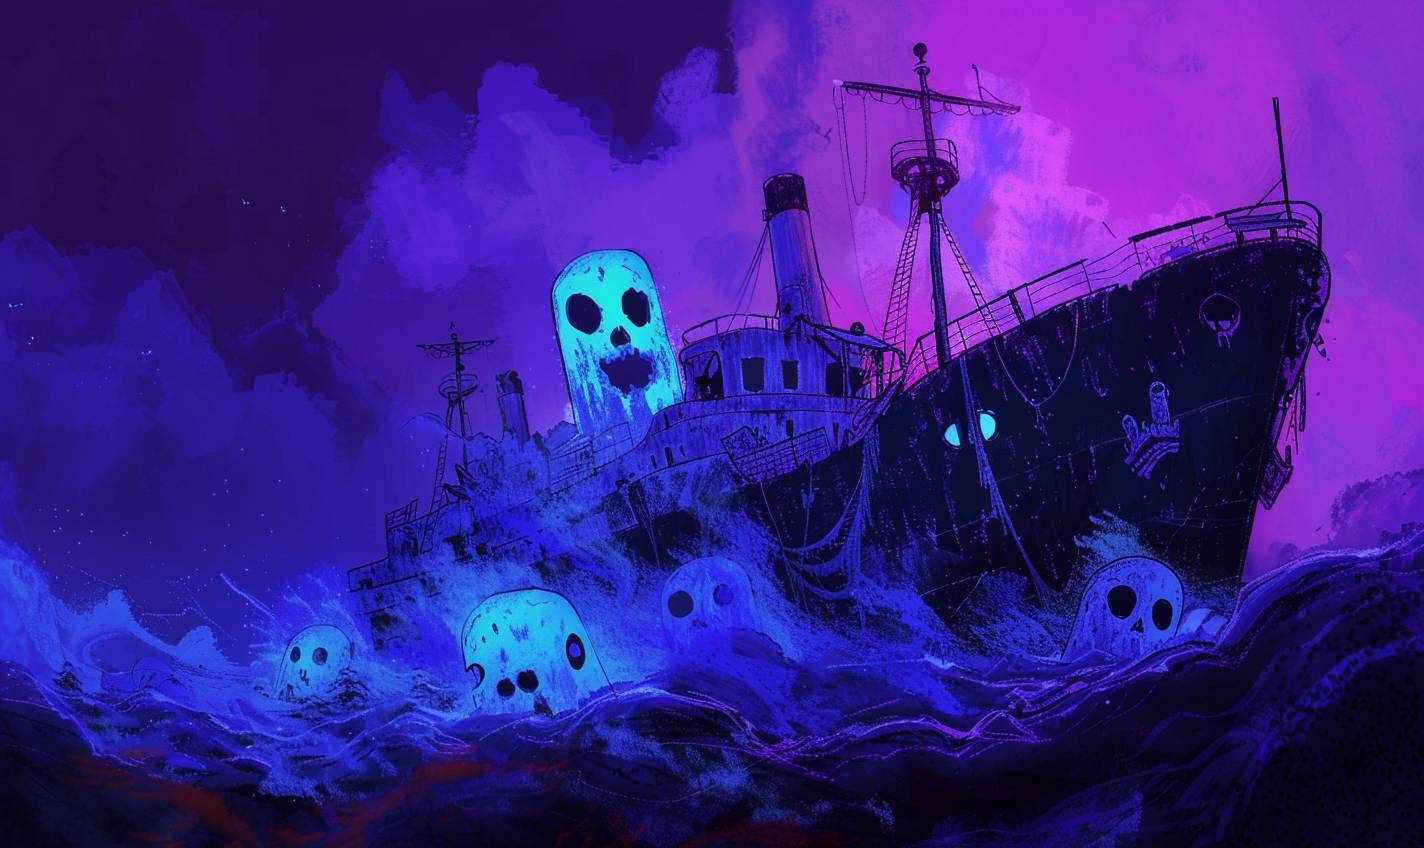 In the style of Allie Brosh, a ghostly shipwreck on a haunted shore